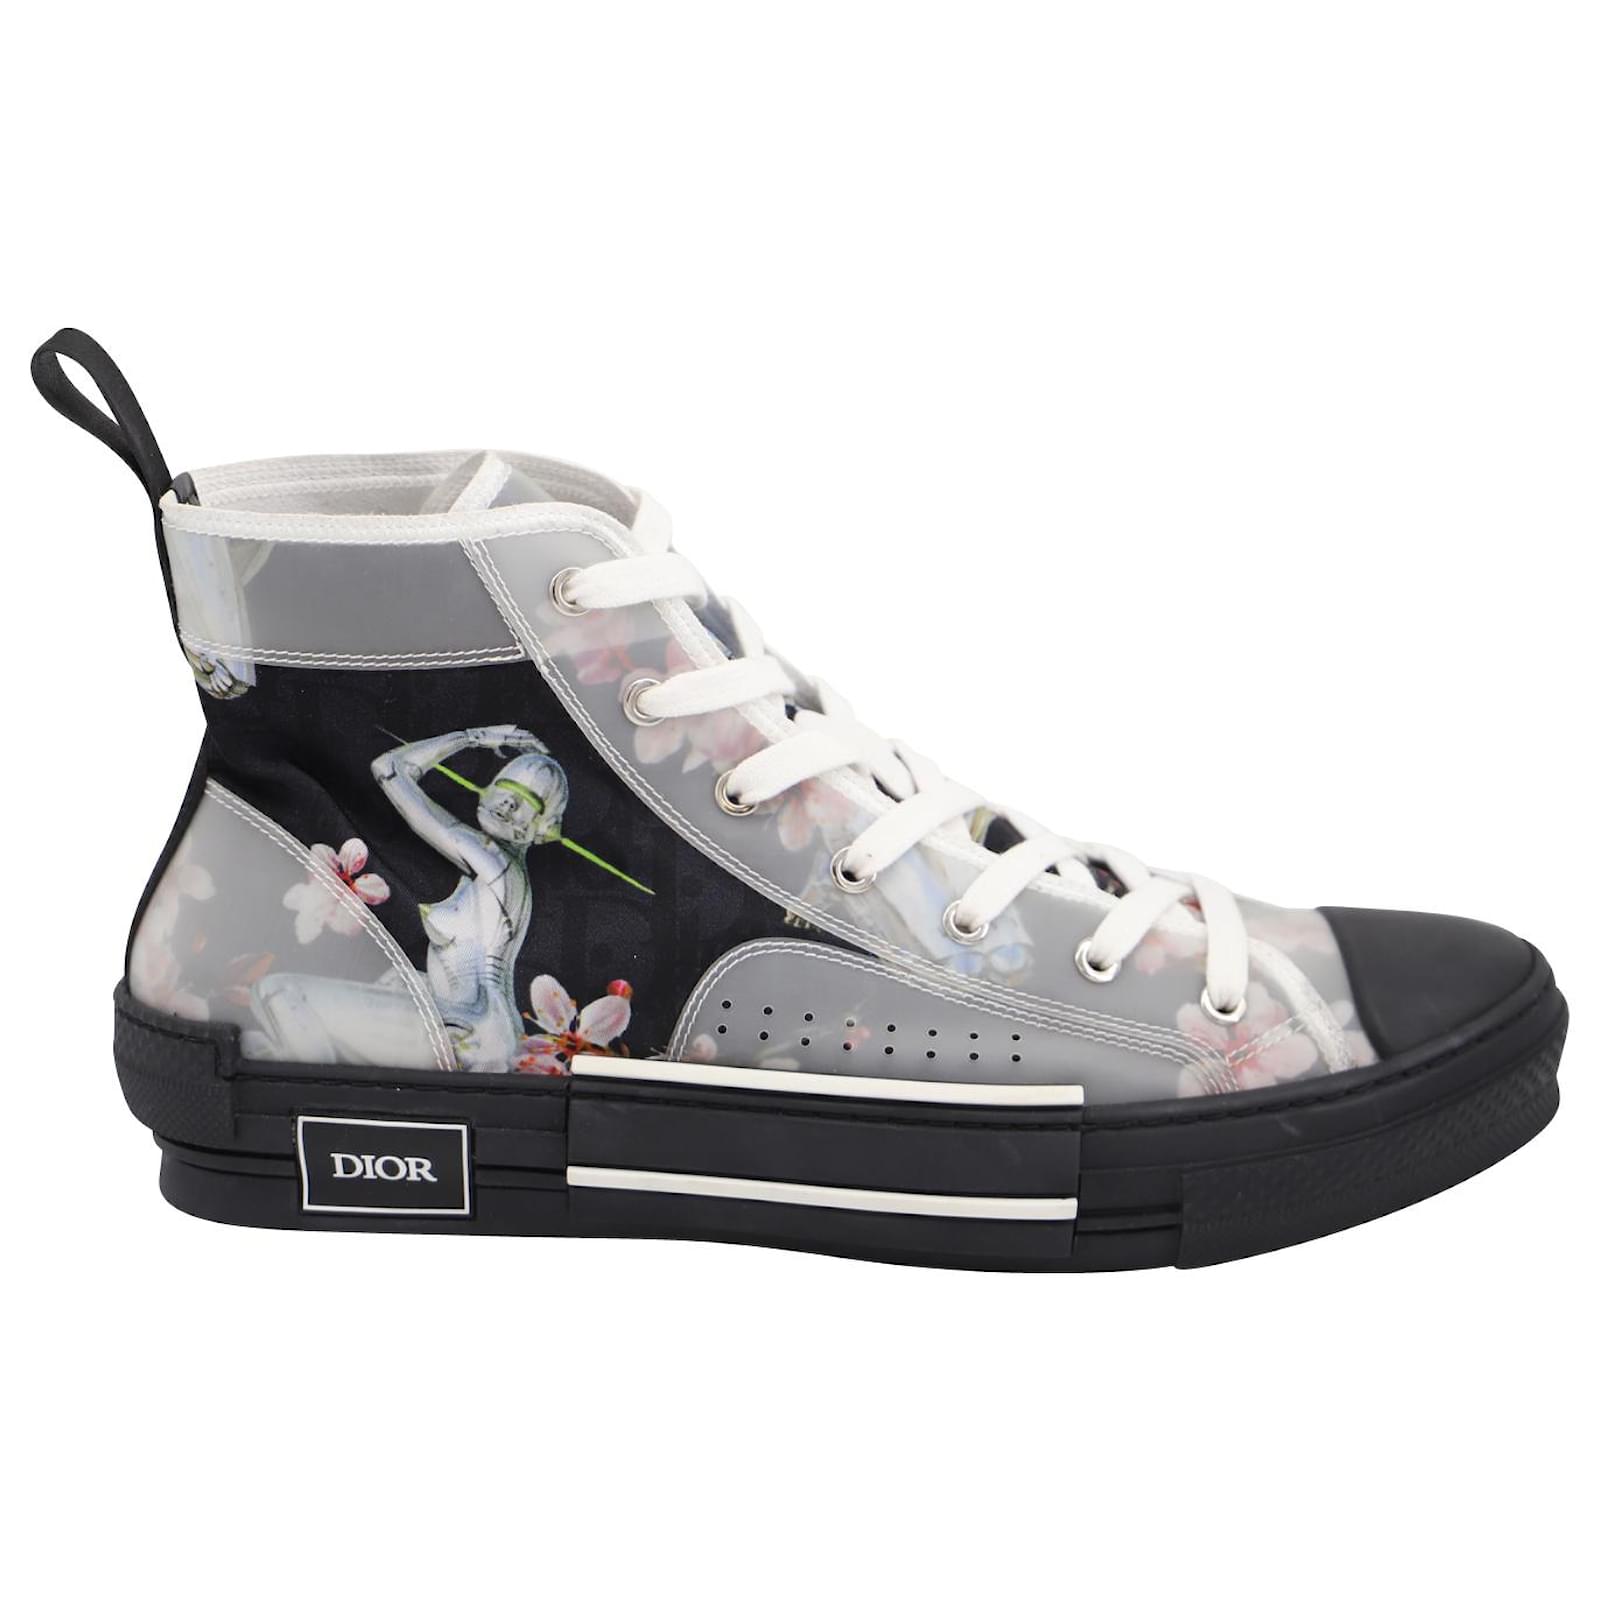 Dior Fusion Technical Canvas High-top Sneaker in Black